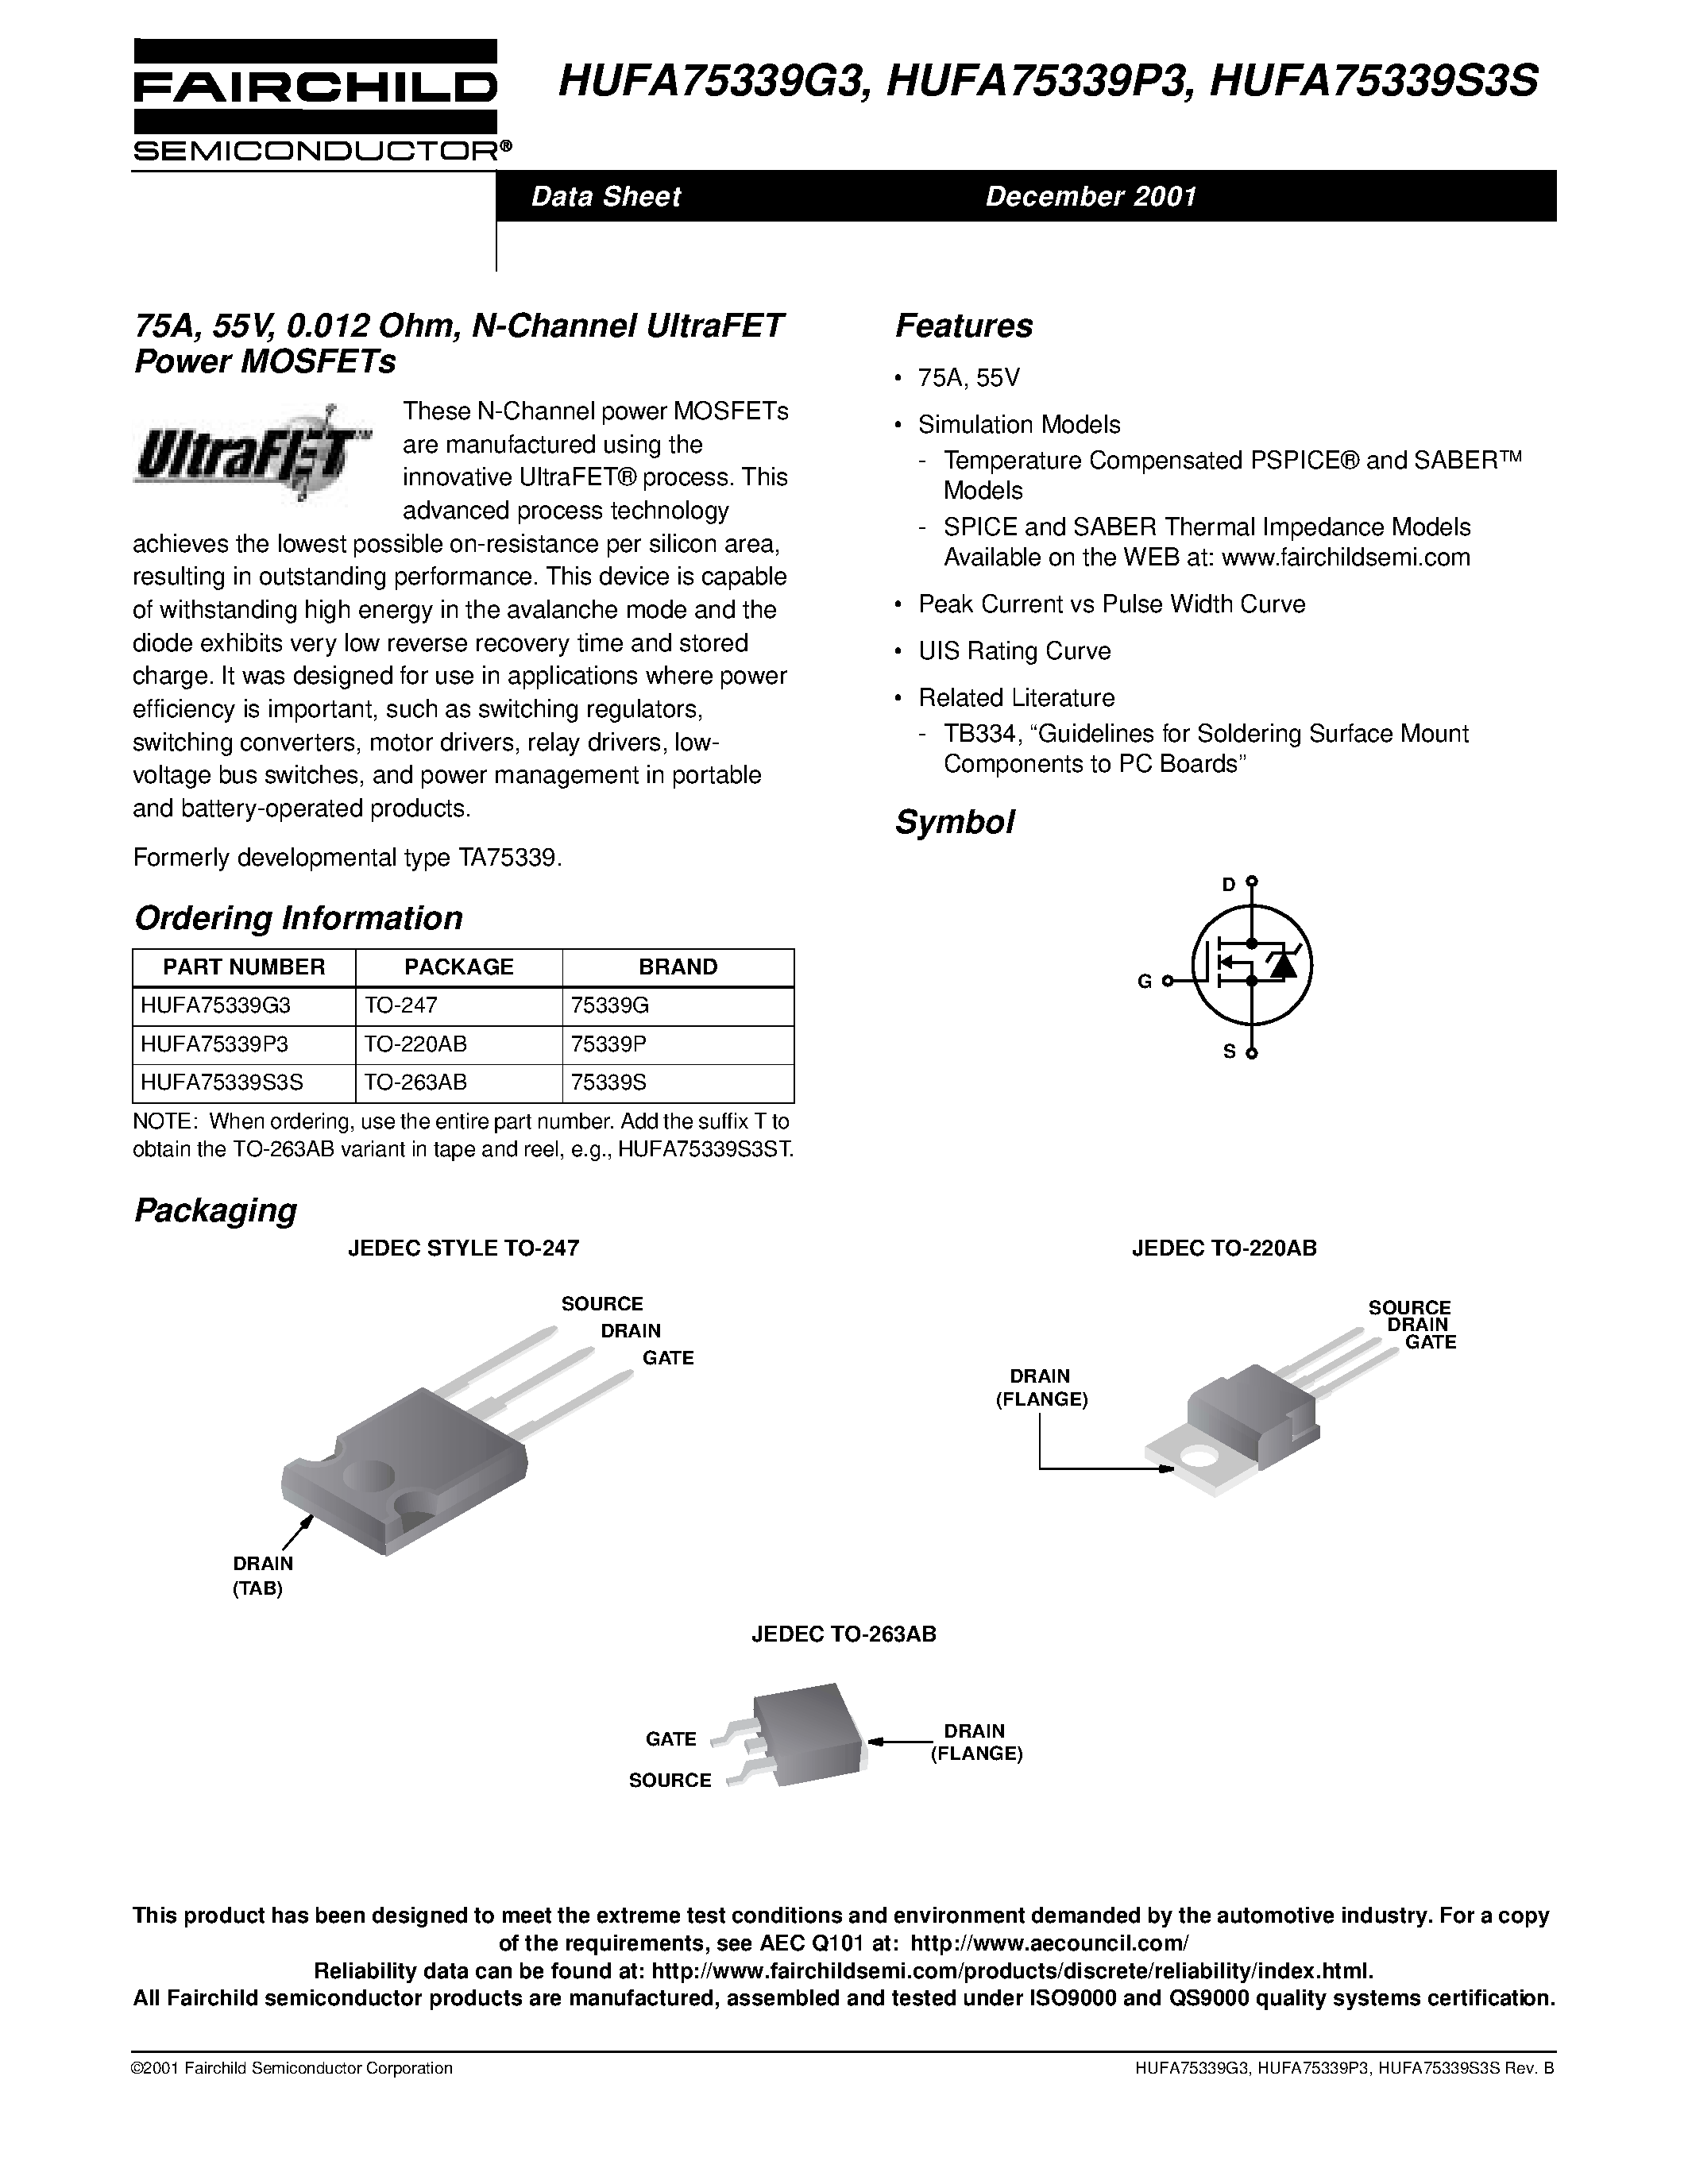 Даташит HUFA75339P3 - 75A/ 55V/ 0.012 Ohm/ N-Channel UltraFET Power MOSFETs страница 1